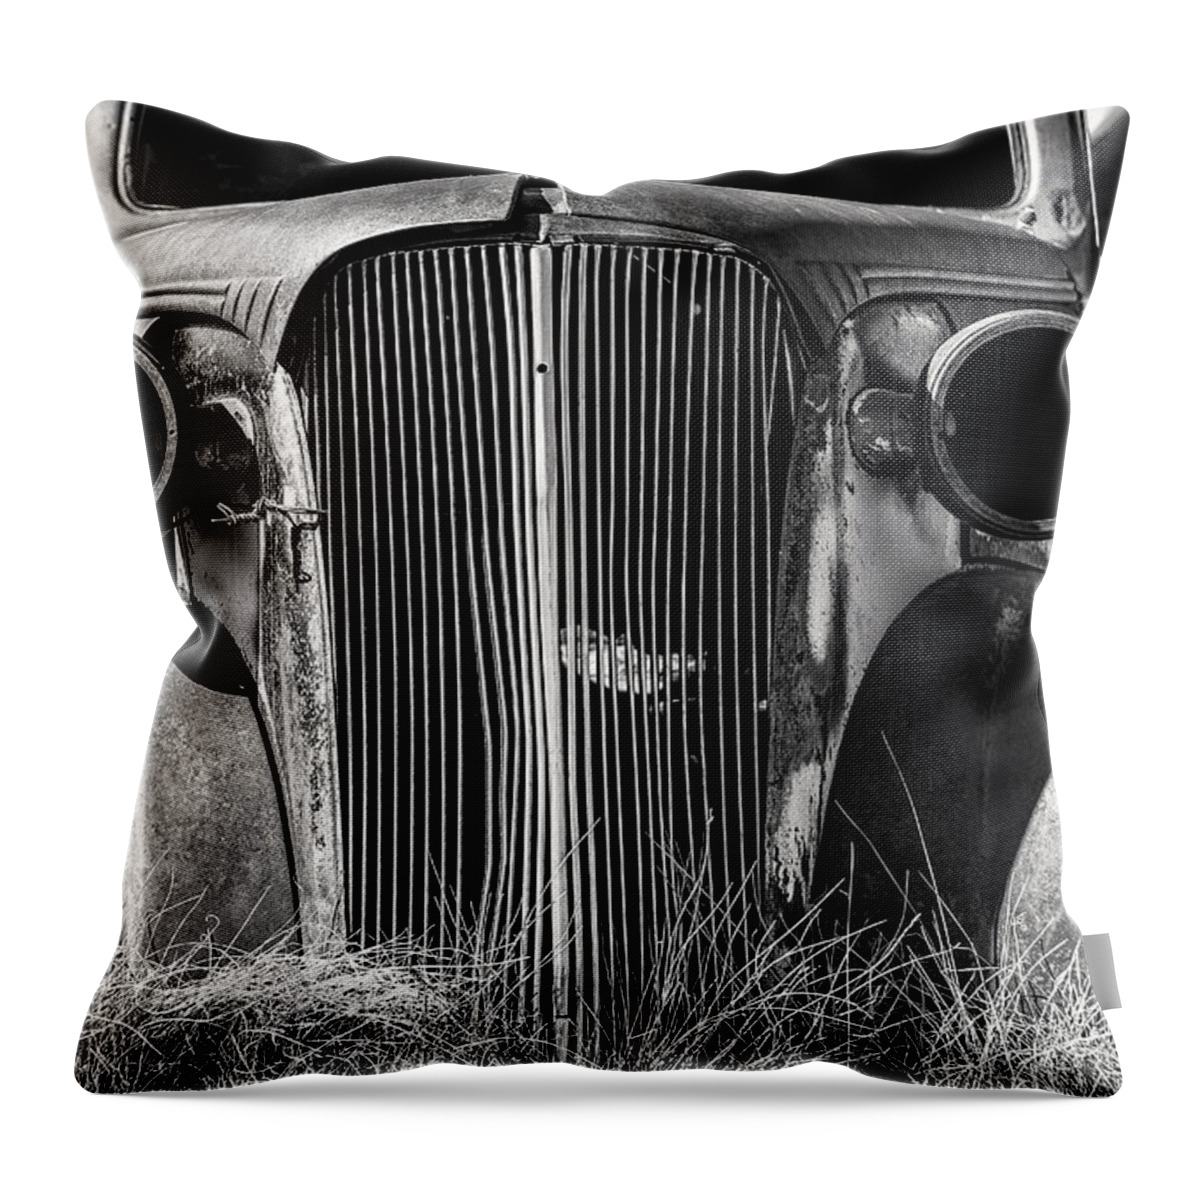 395 Throw Pillow featuring the photograph Cheeky by Denise Dube by Denise Dube